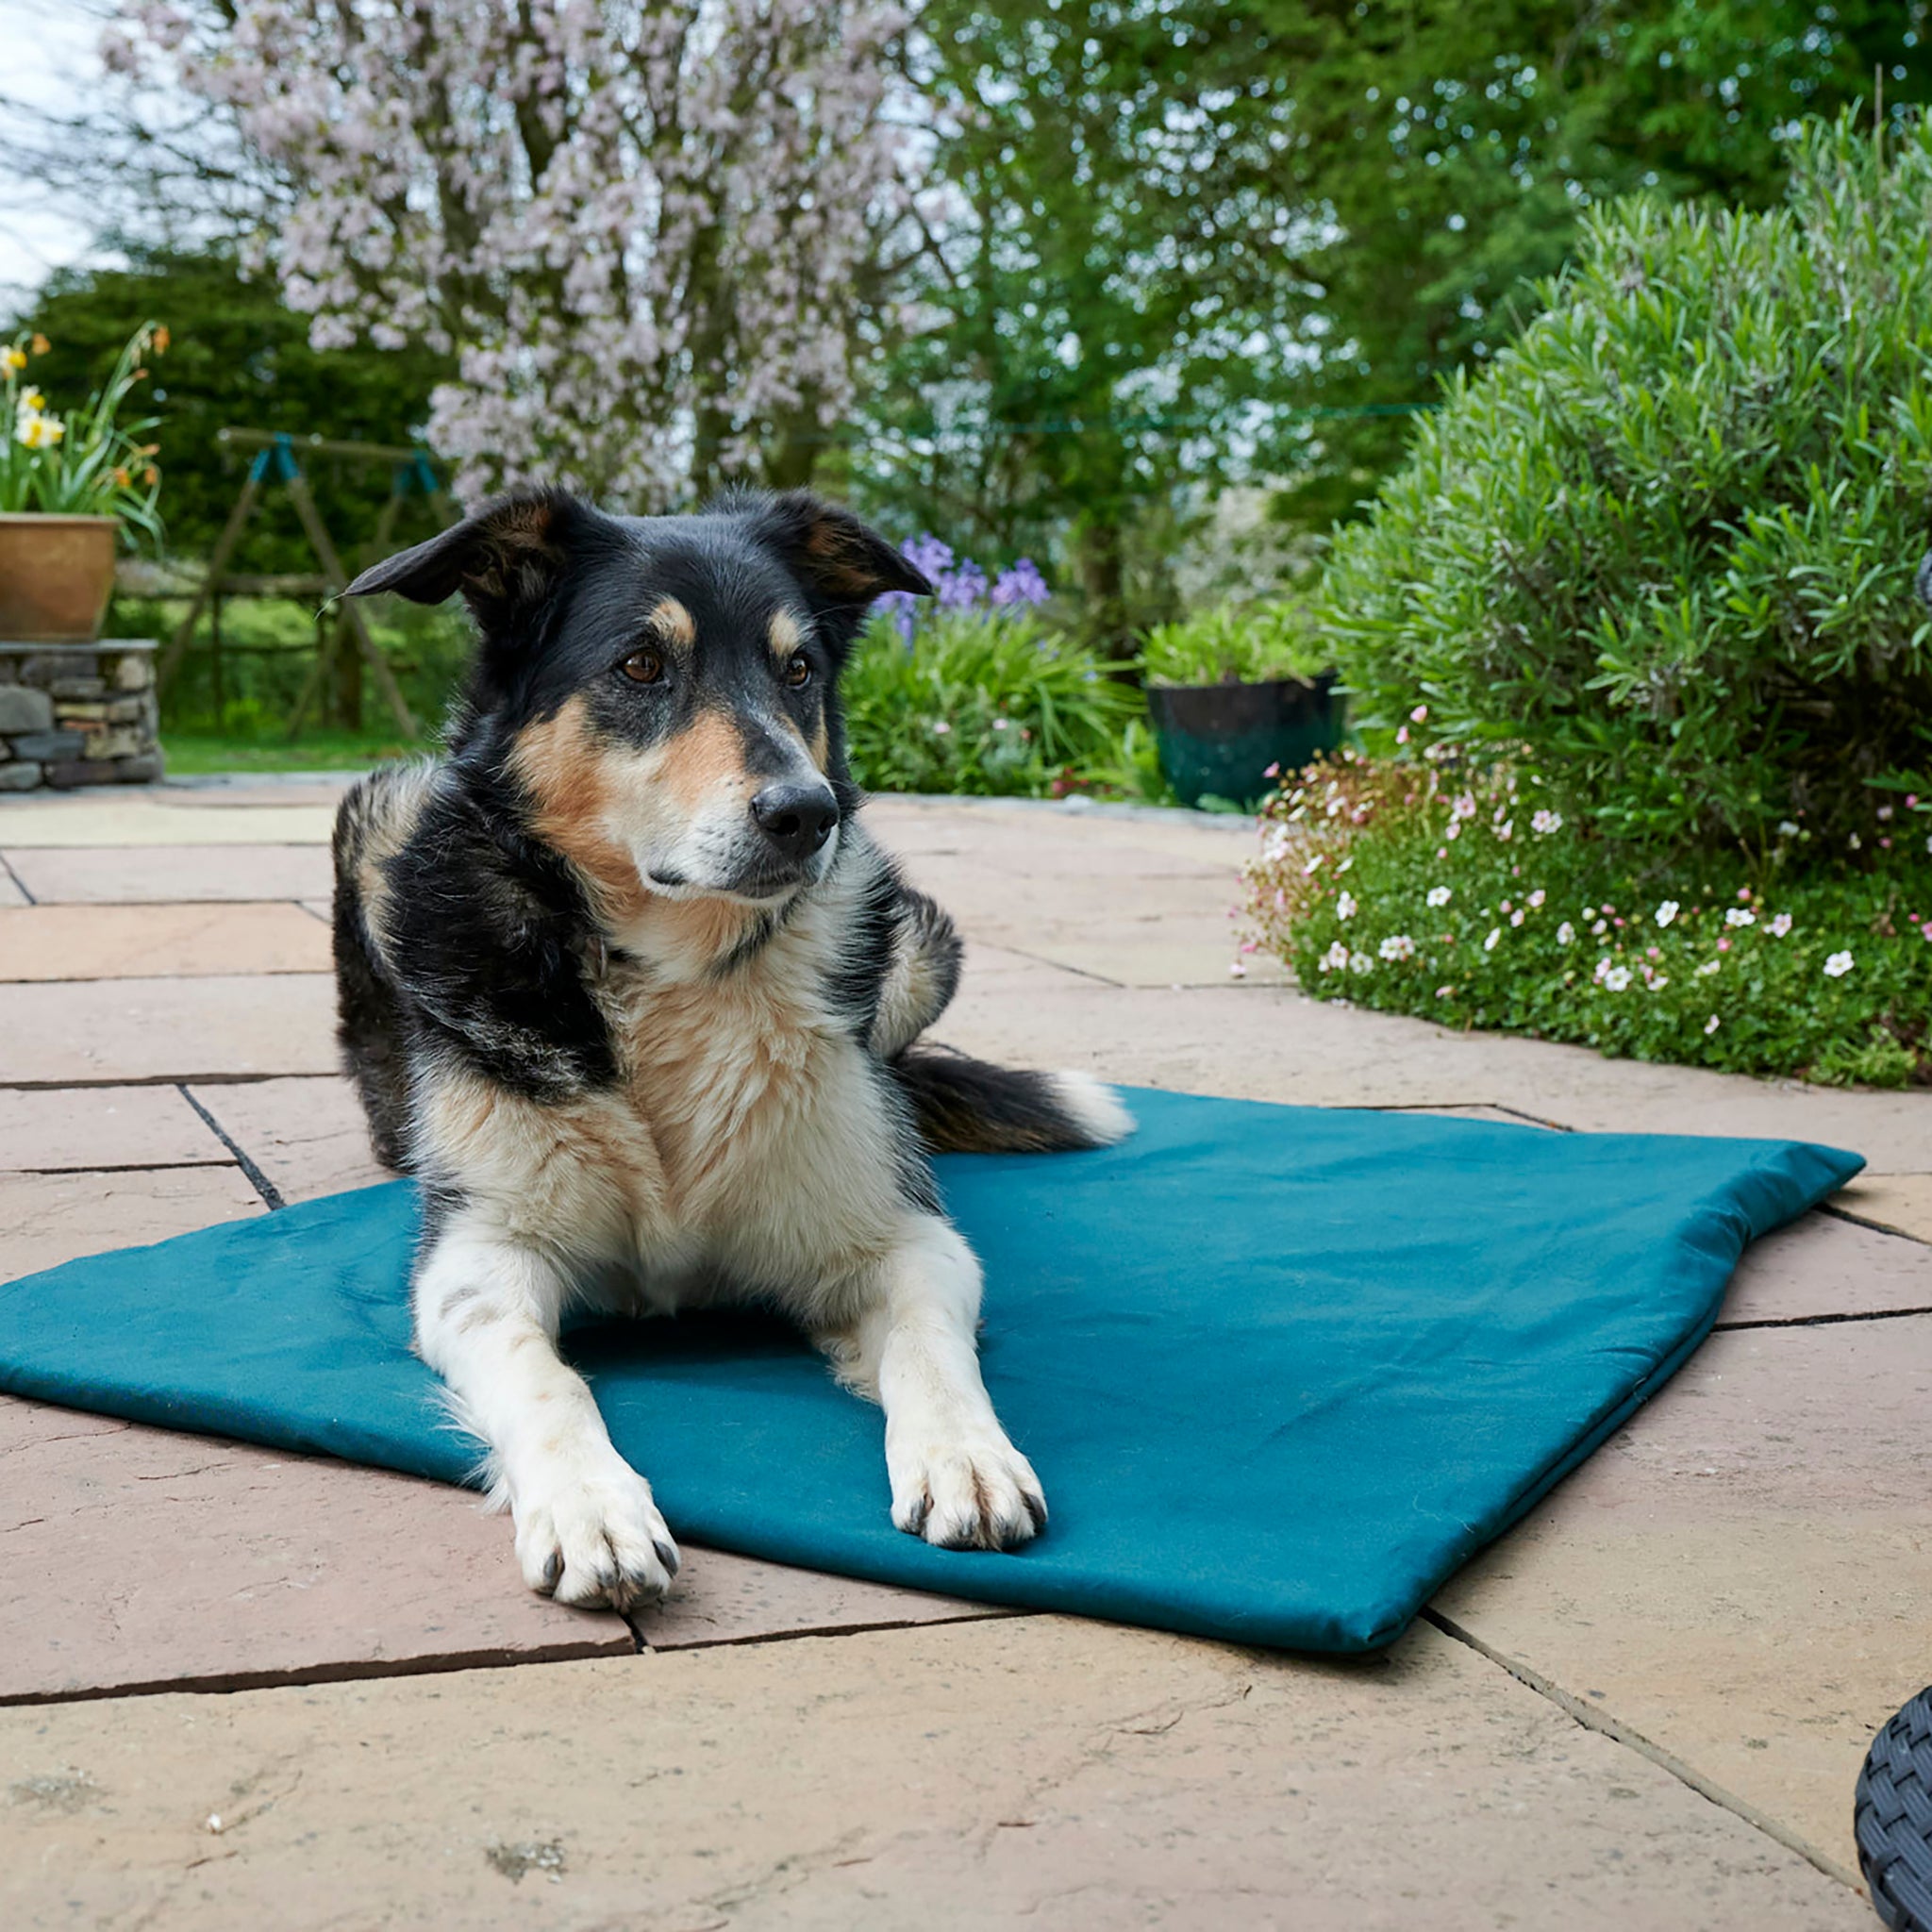 A tricolour border collie is lain upright on a green Chimney Sheep woollen travel dog bed. This portable dog bed can be rolled up and packed away easily. The bed is lain on paving stones